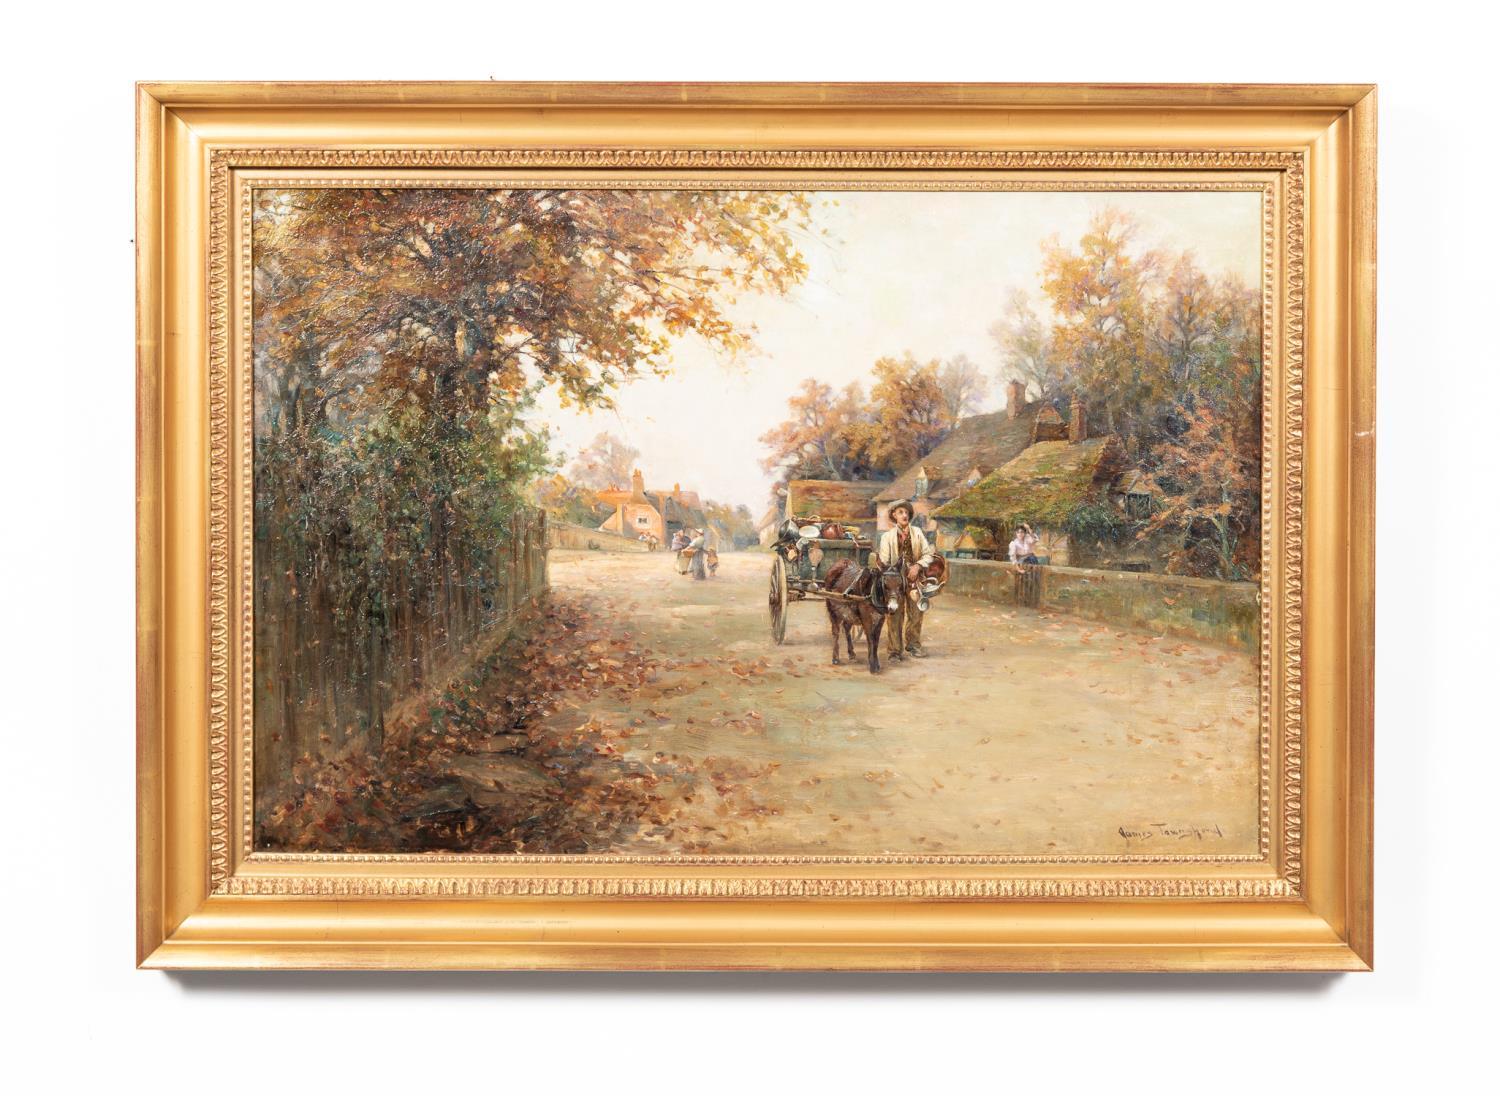 JAMES TOWNSEND, PEDDLERS CART, OIL